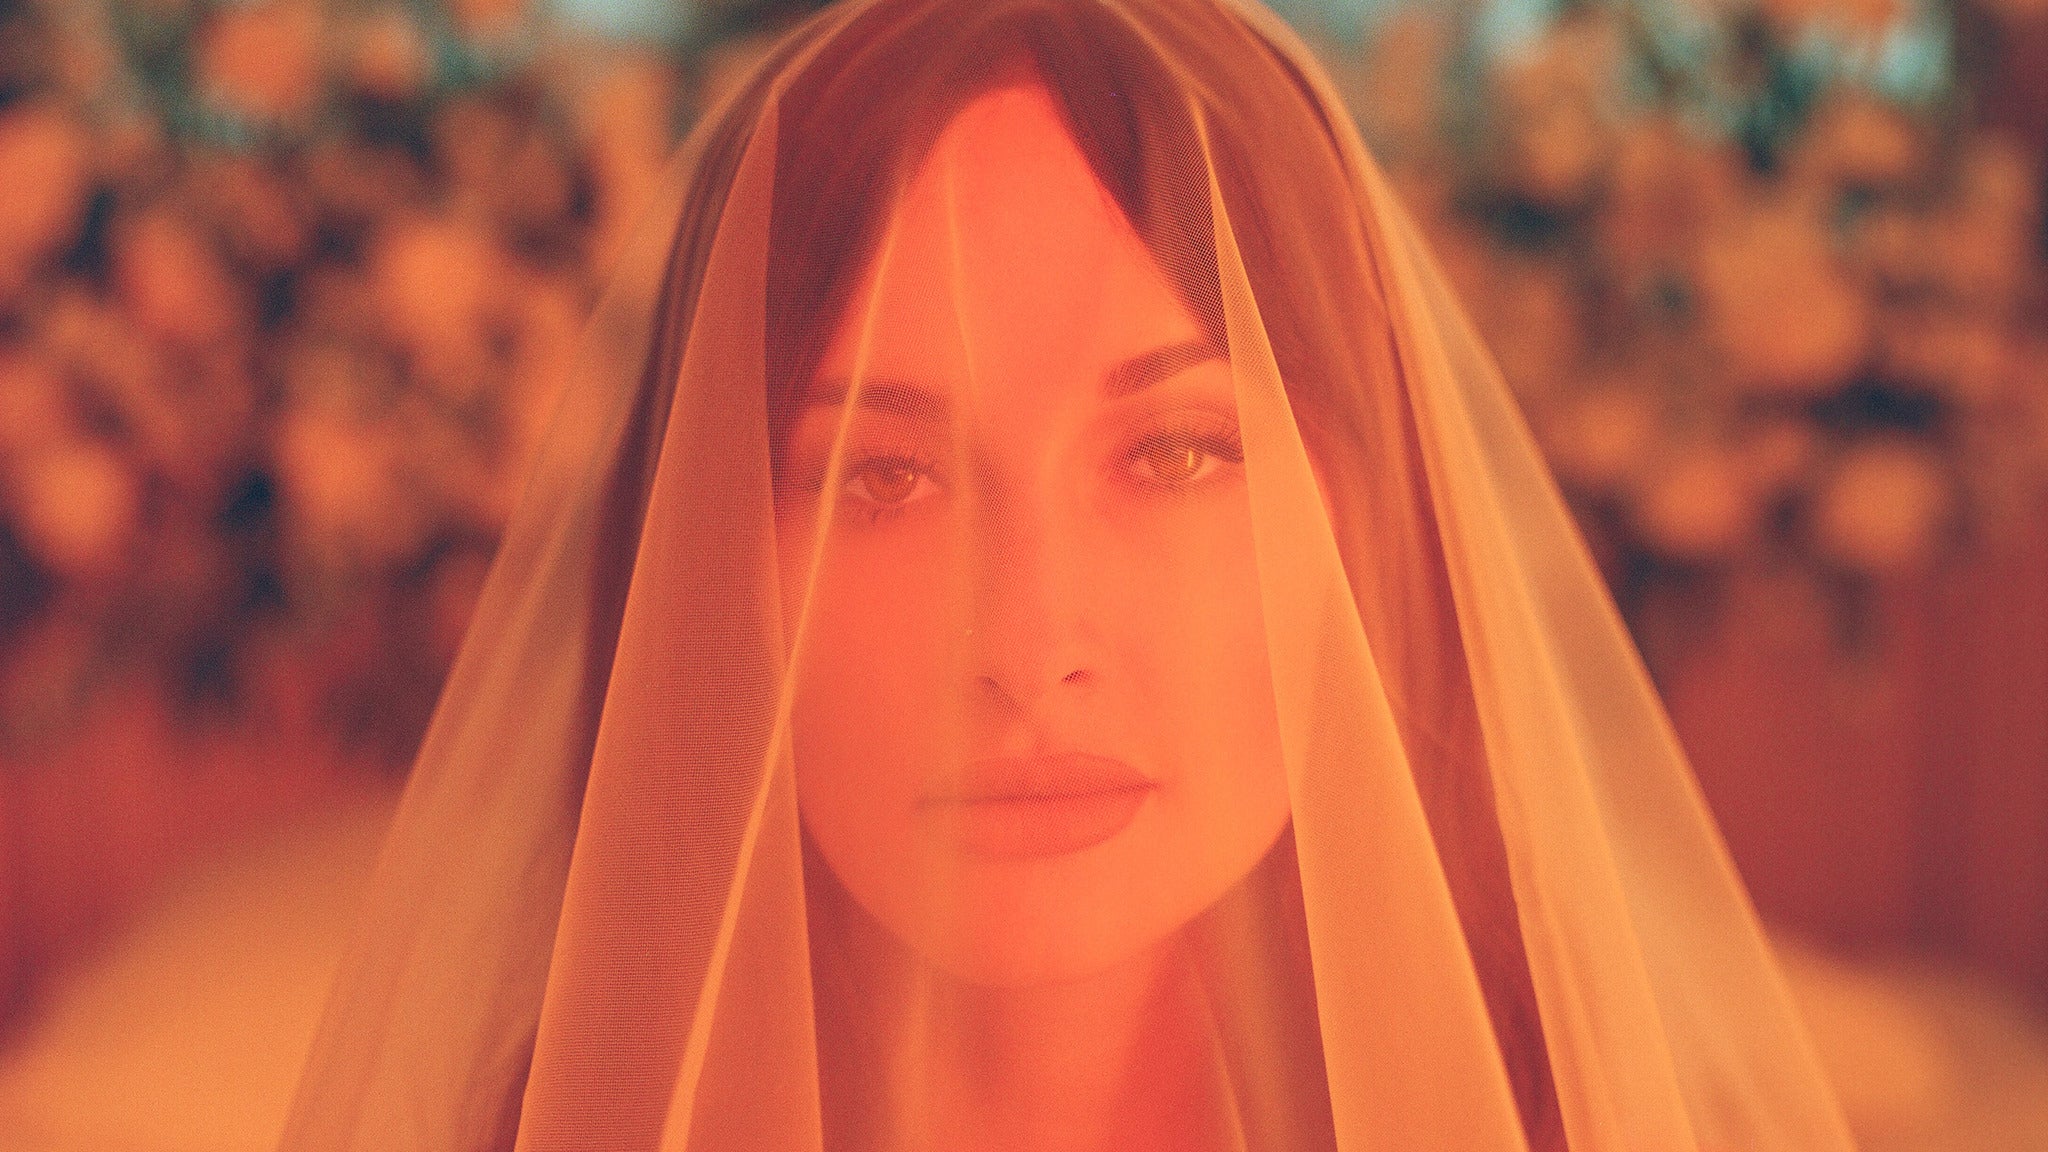 Kacey Musgraves | star-crossed: unveiled